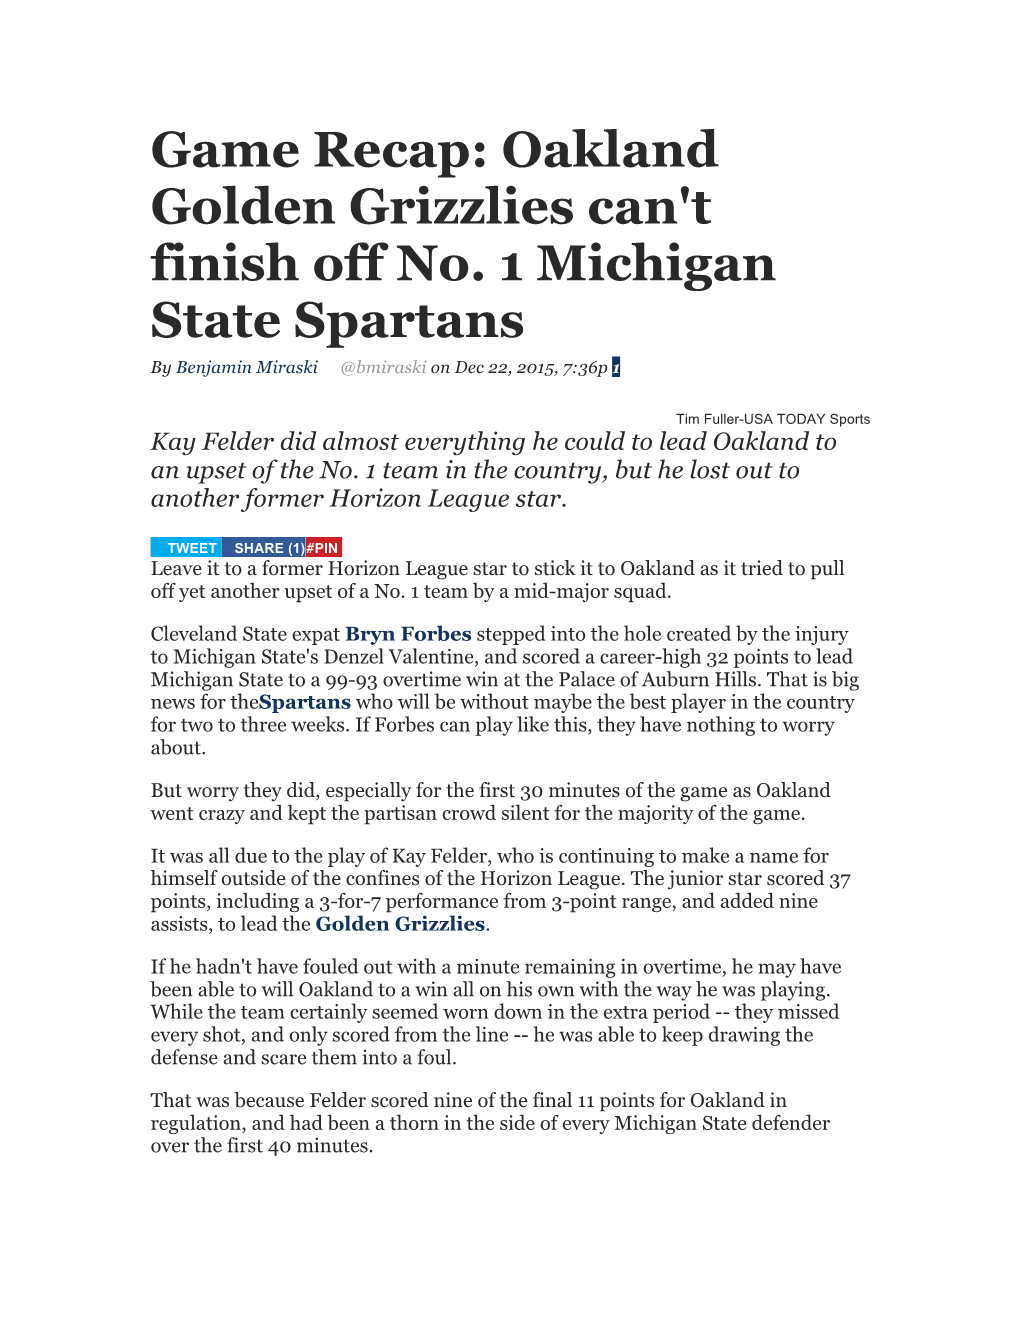 Game Recap: Oakland Golden Grizzlies Can't Finish Off No. 1 Michigan State Spartans